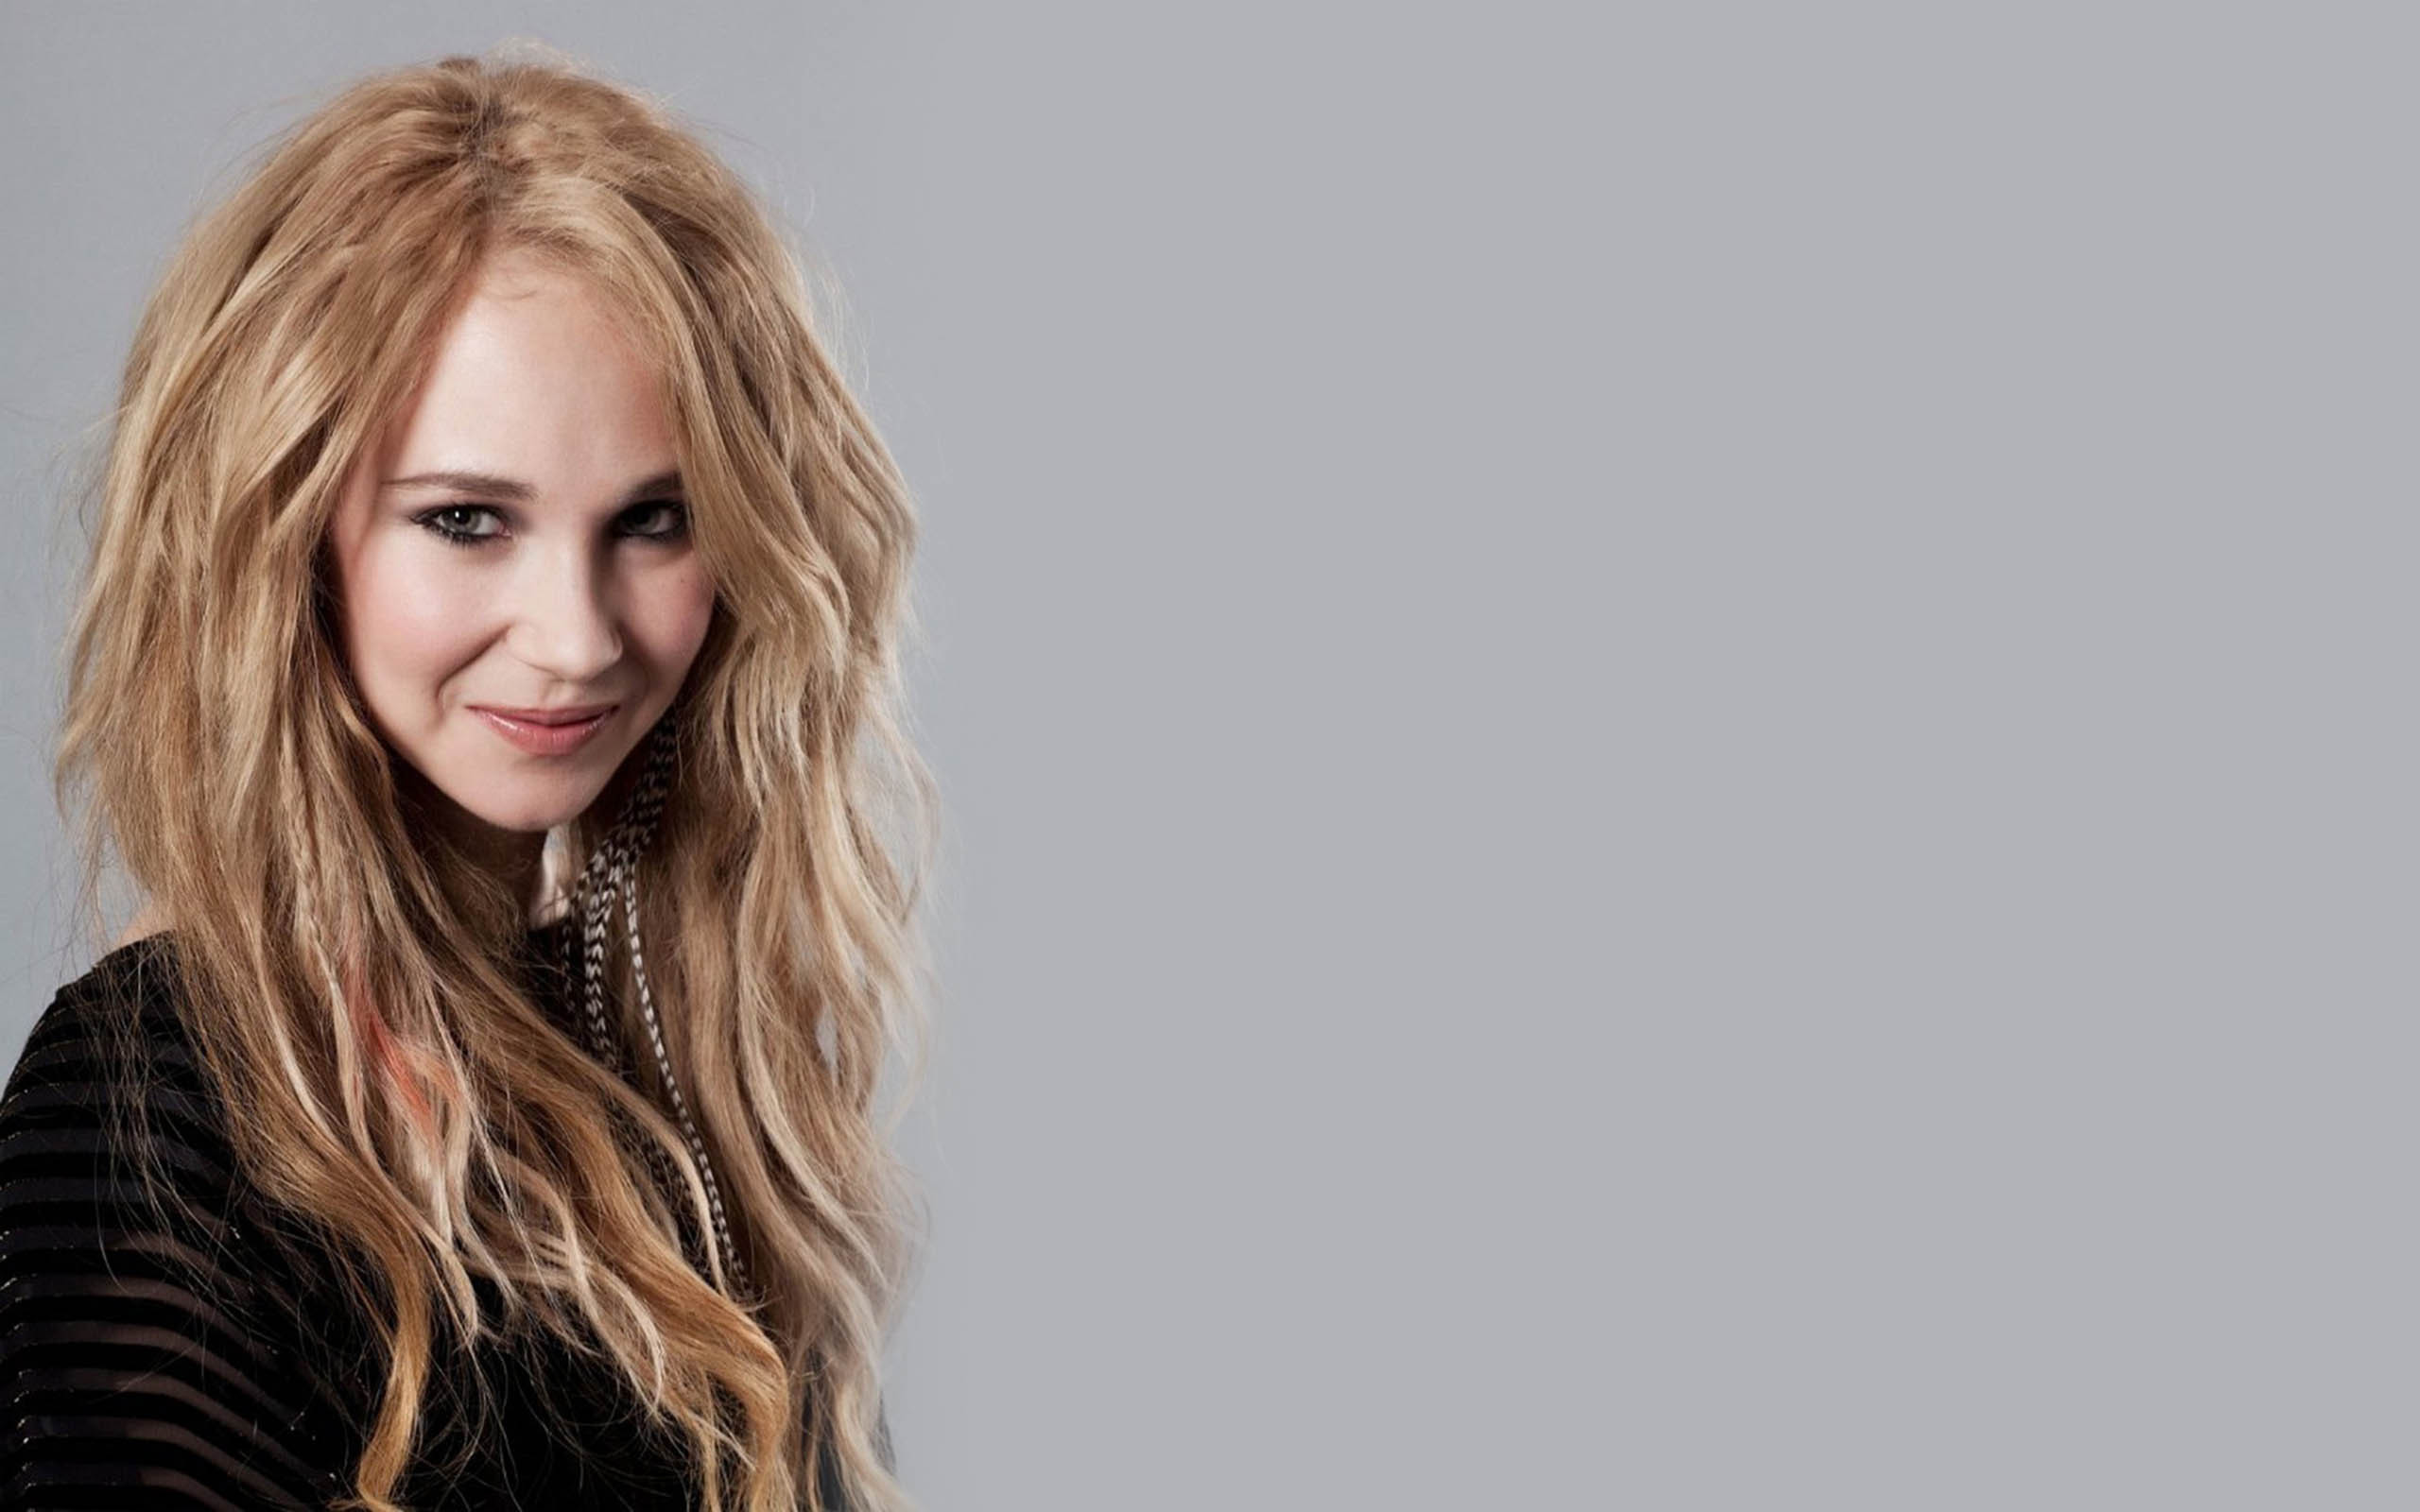 All Juno Temple wallpapers.